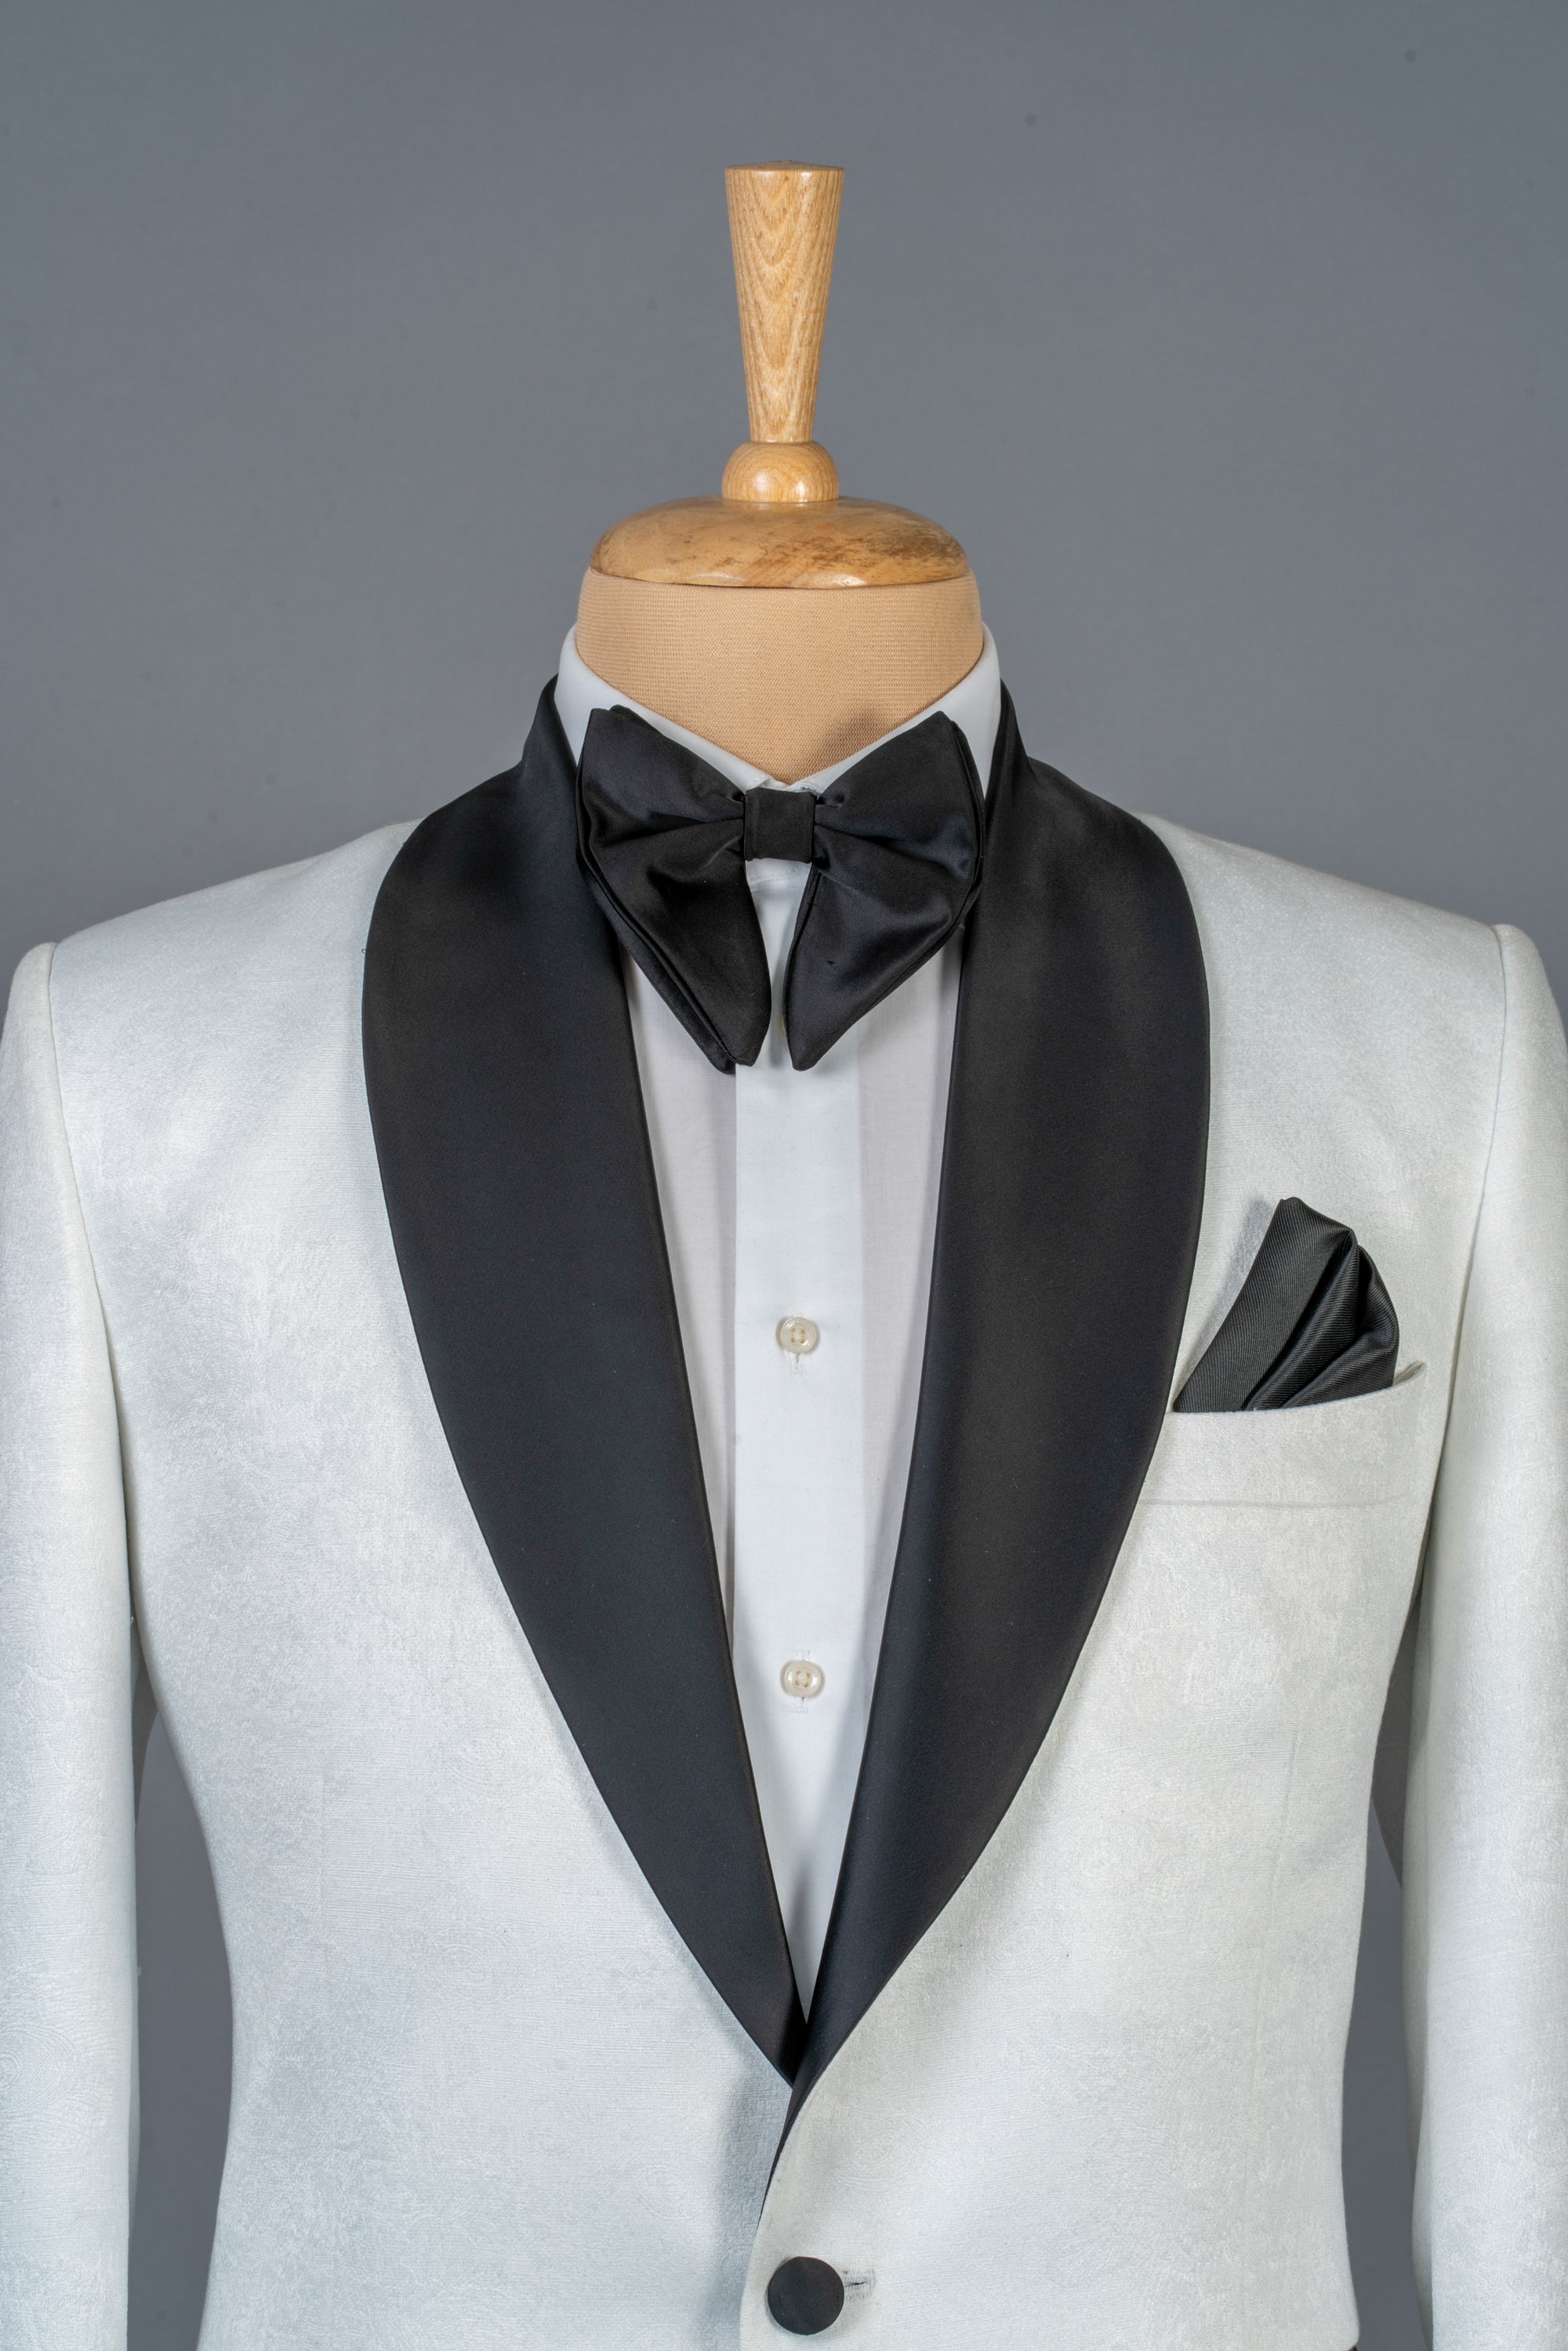 Tuxedo Suits: The Perfect Choice for Sophisticated Gentlemen